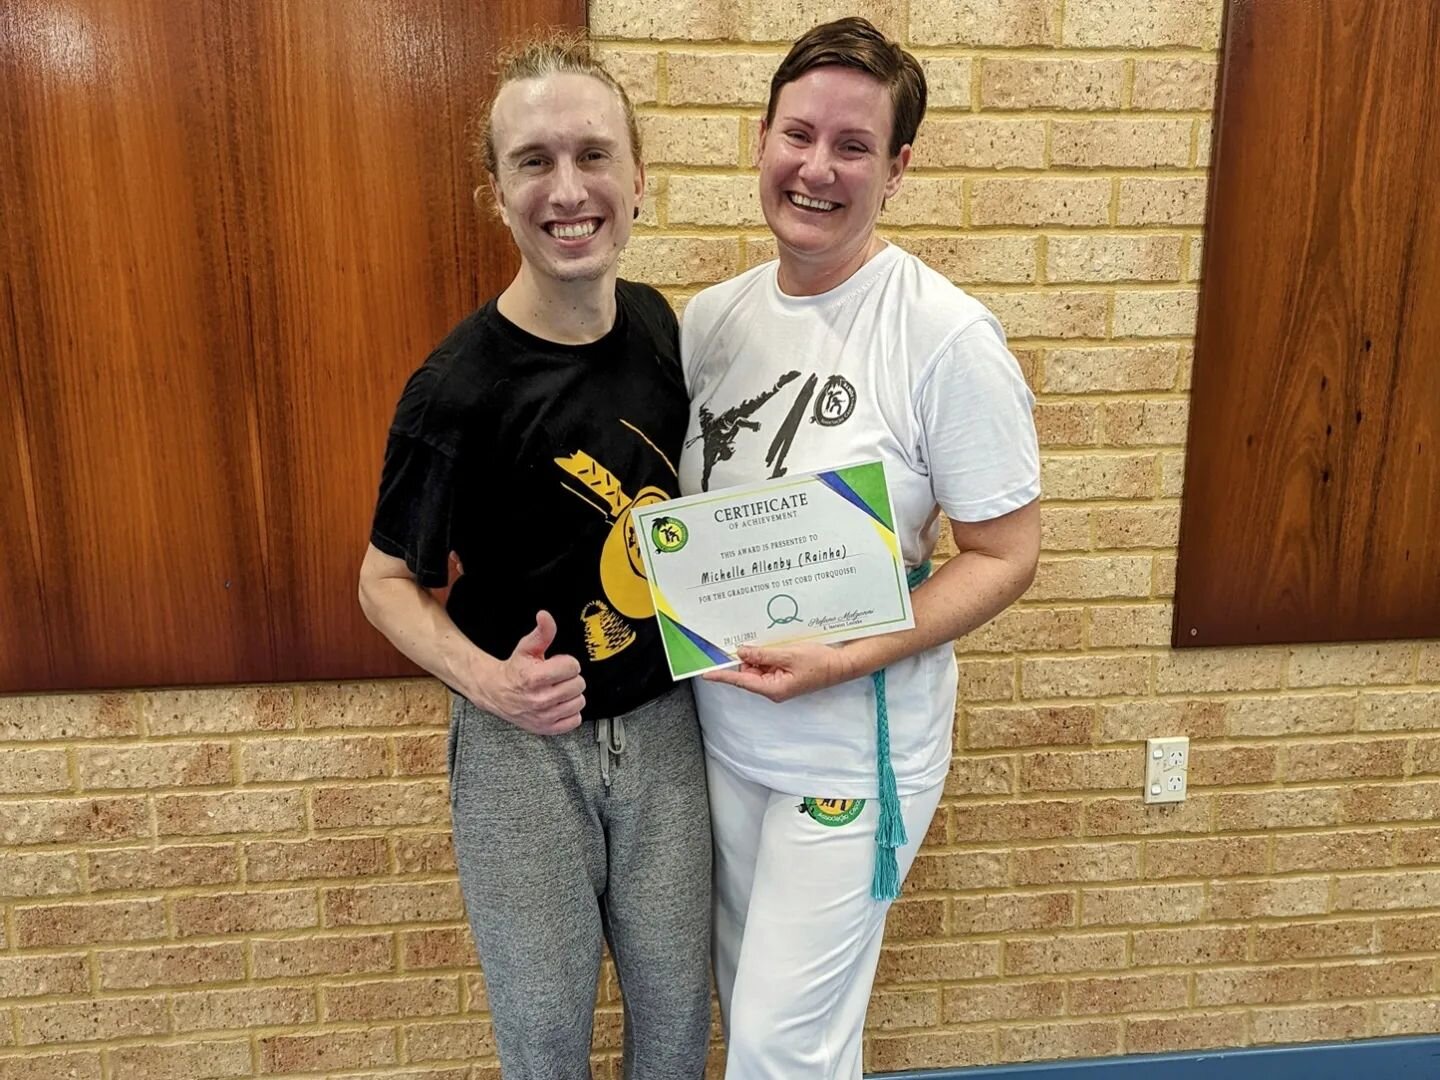 Huge congratulations to one of our first students Rainha (Michelle) who received her primera cord&atilde;o in class tonight after an amazing roda 👏🏼👏🏼🥳🥳

Although Michelle had trained and was all geared up to attend last year's Batizado, ultima